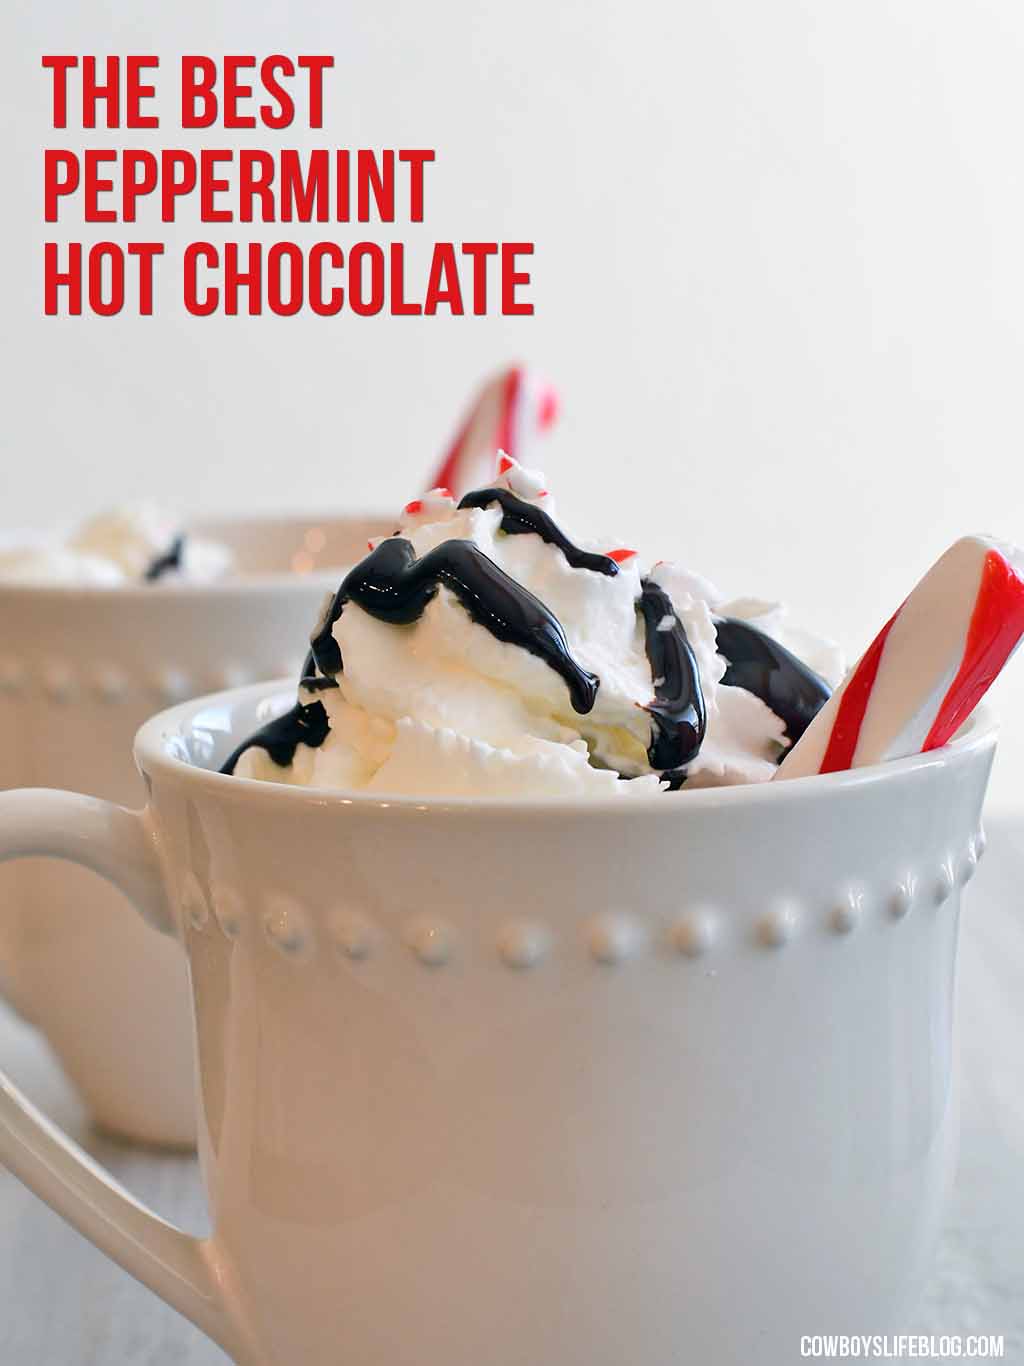 The Best Peppermint Hot Chocolate